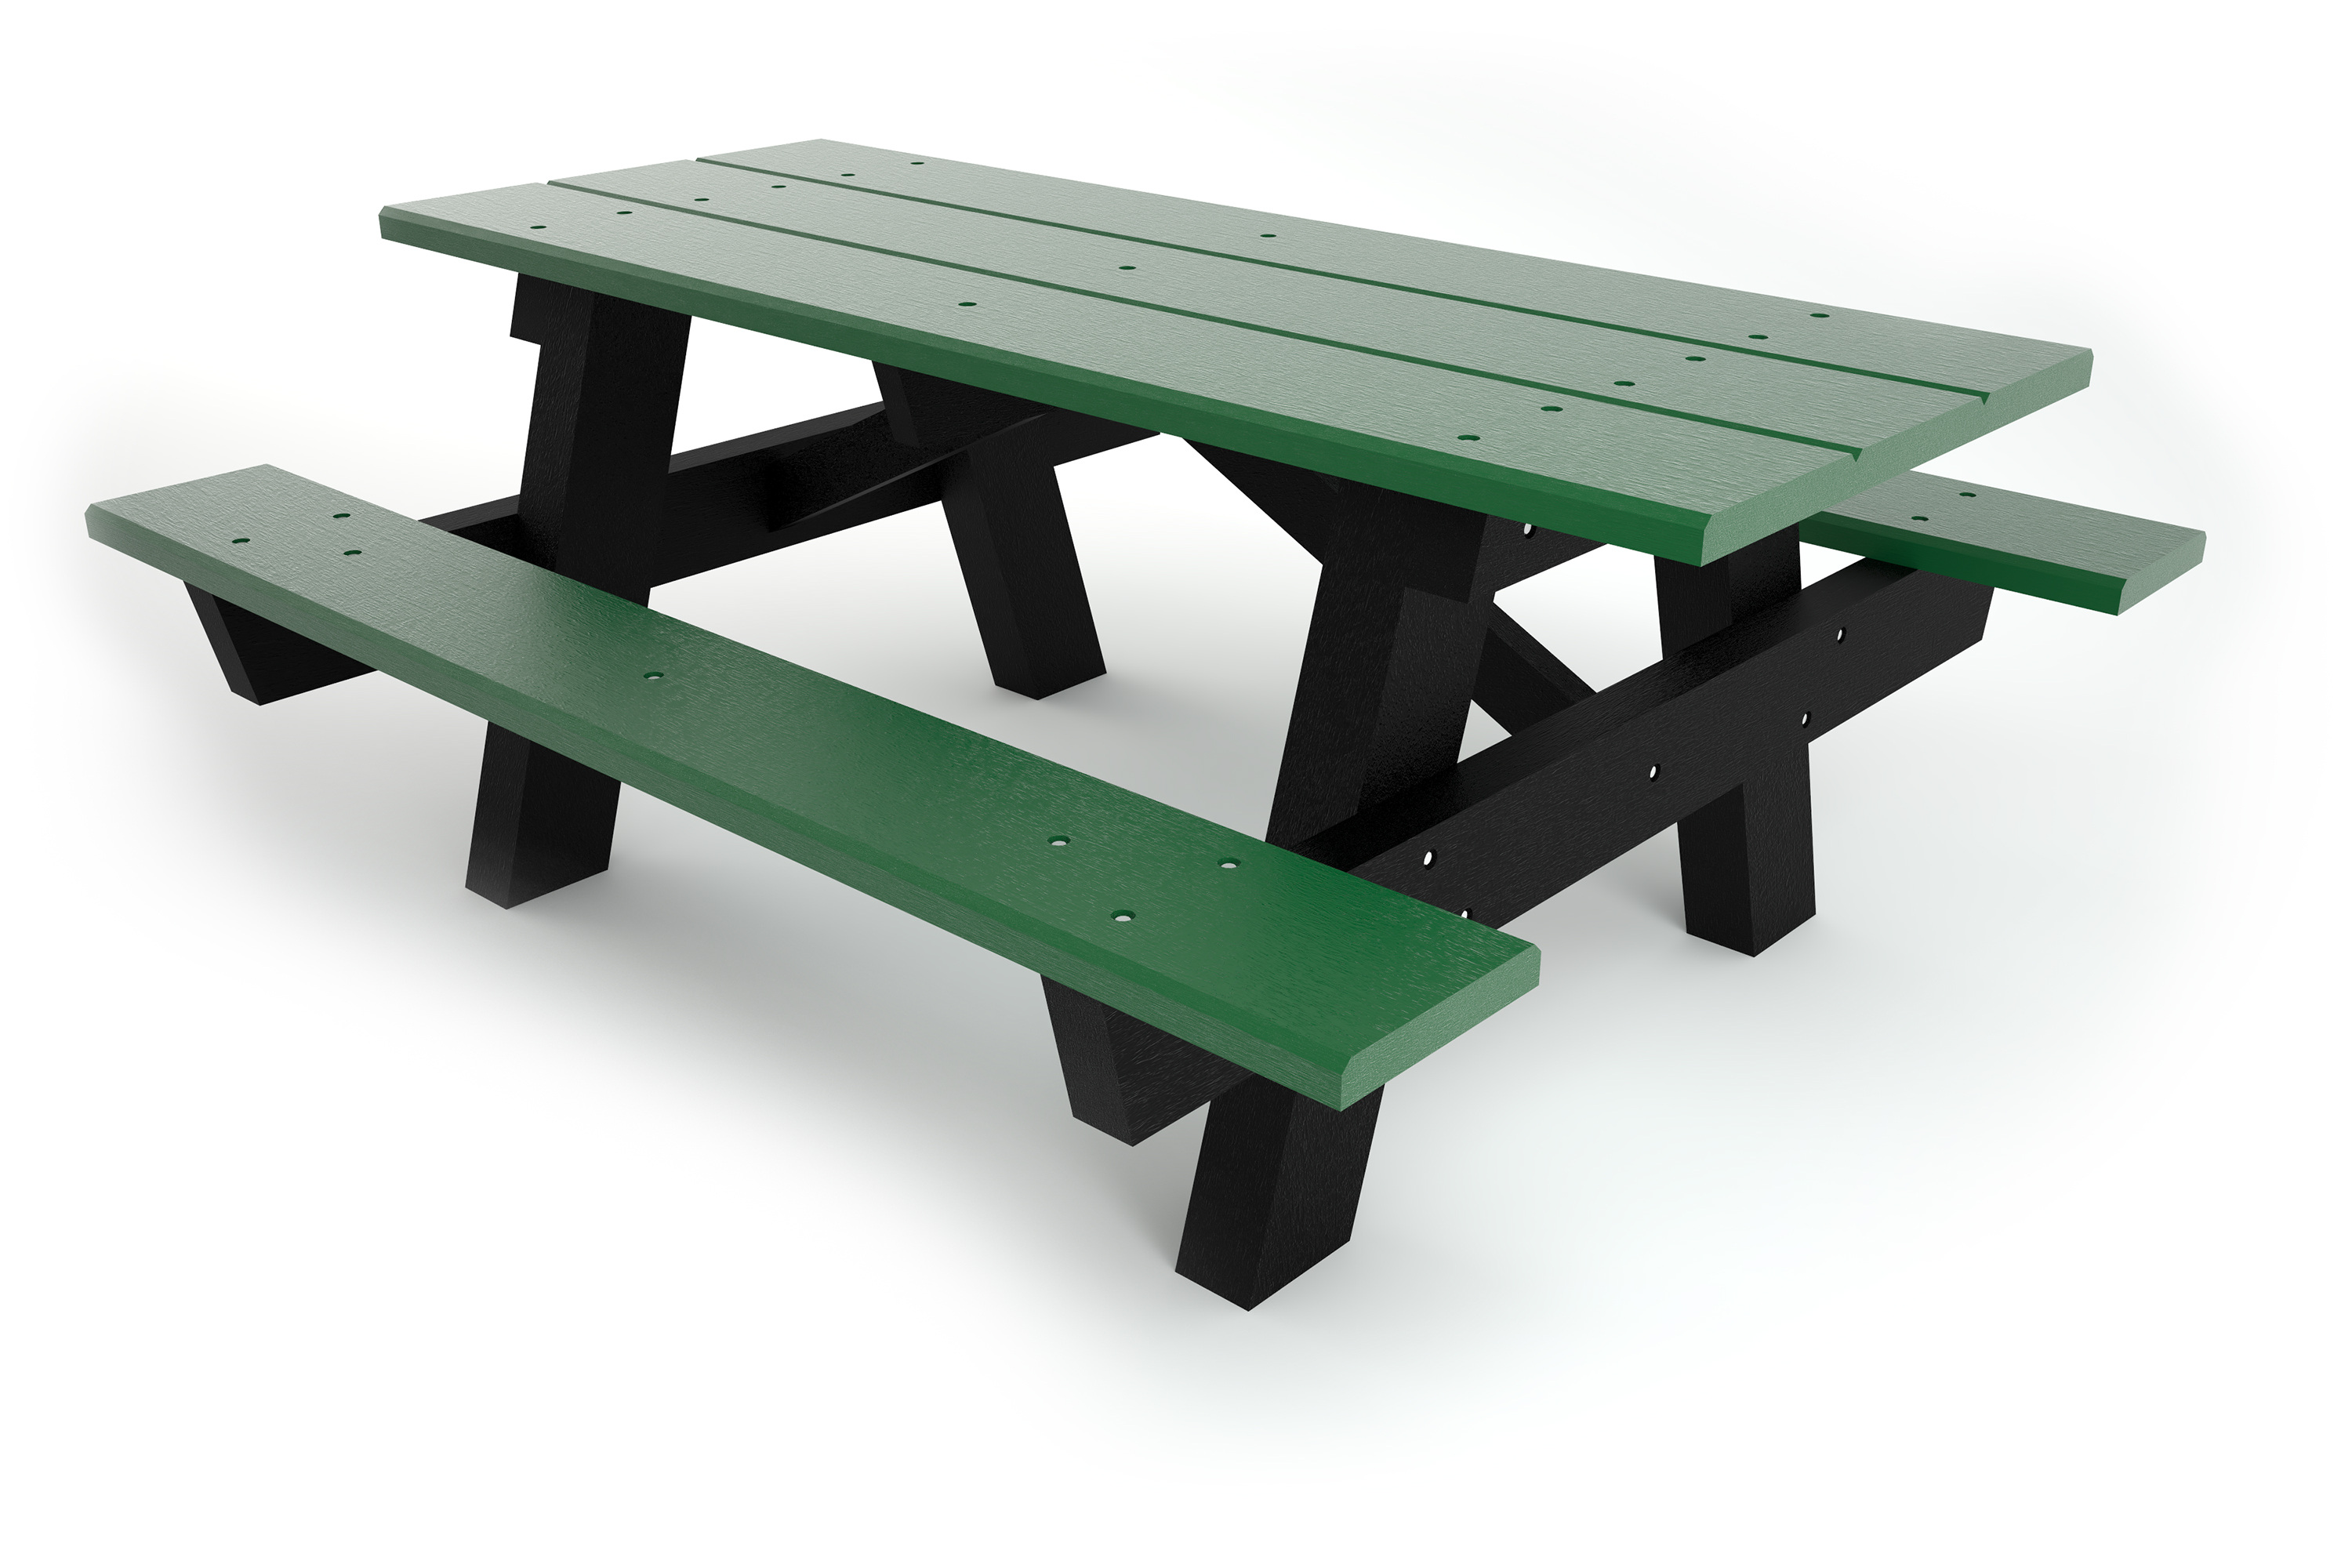 A Frame Table - Front GRE